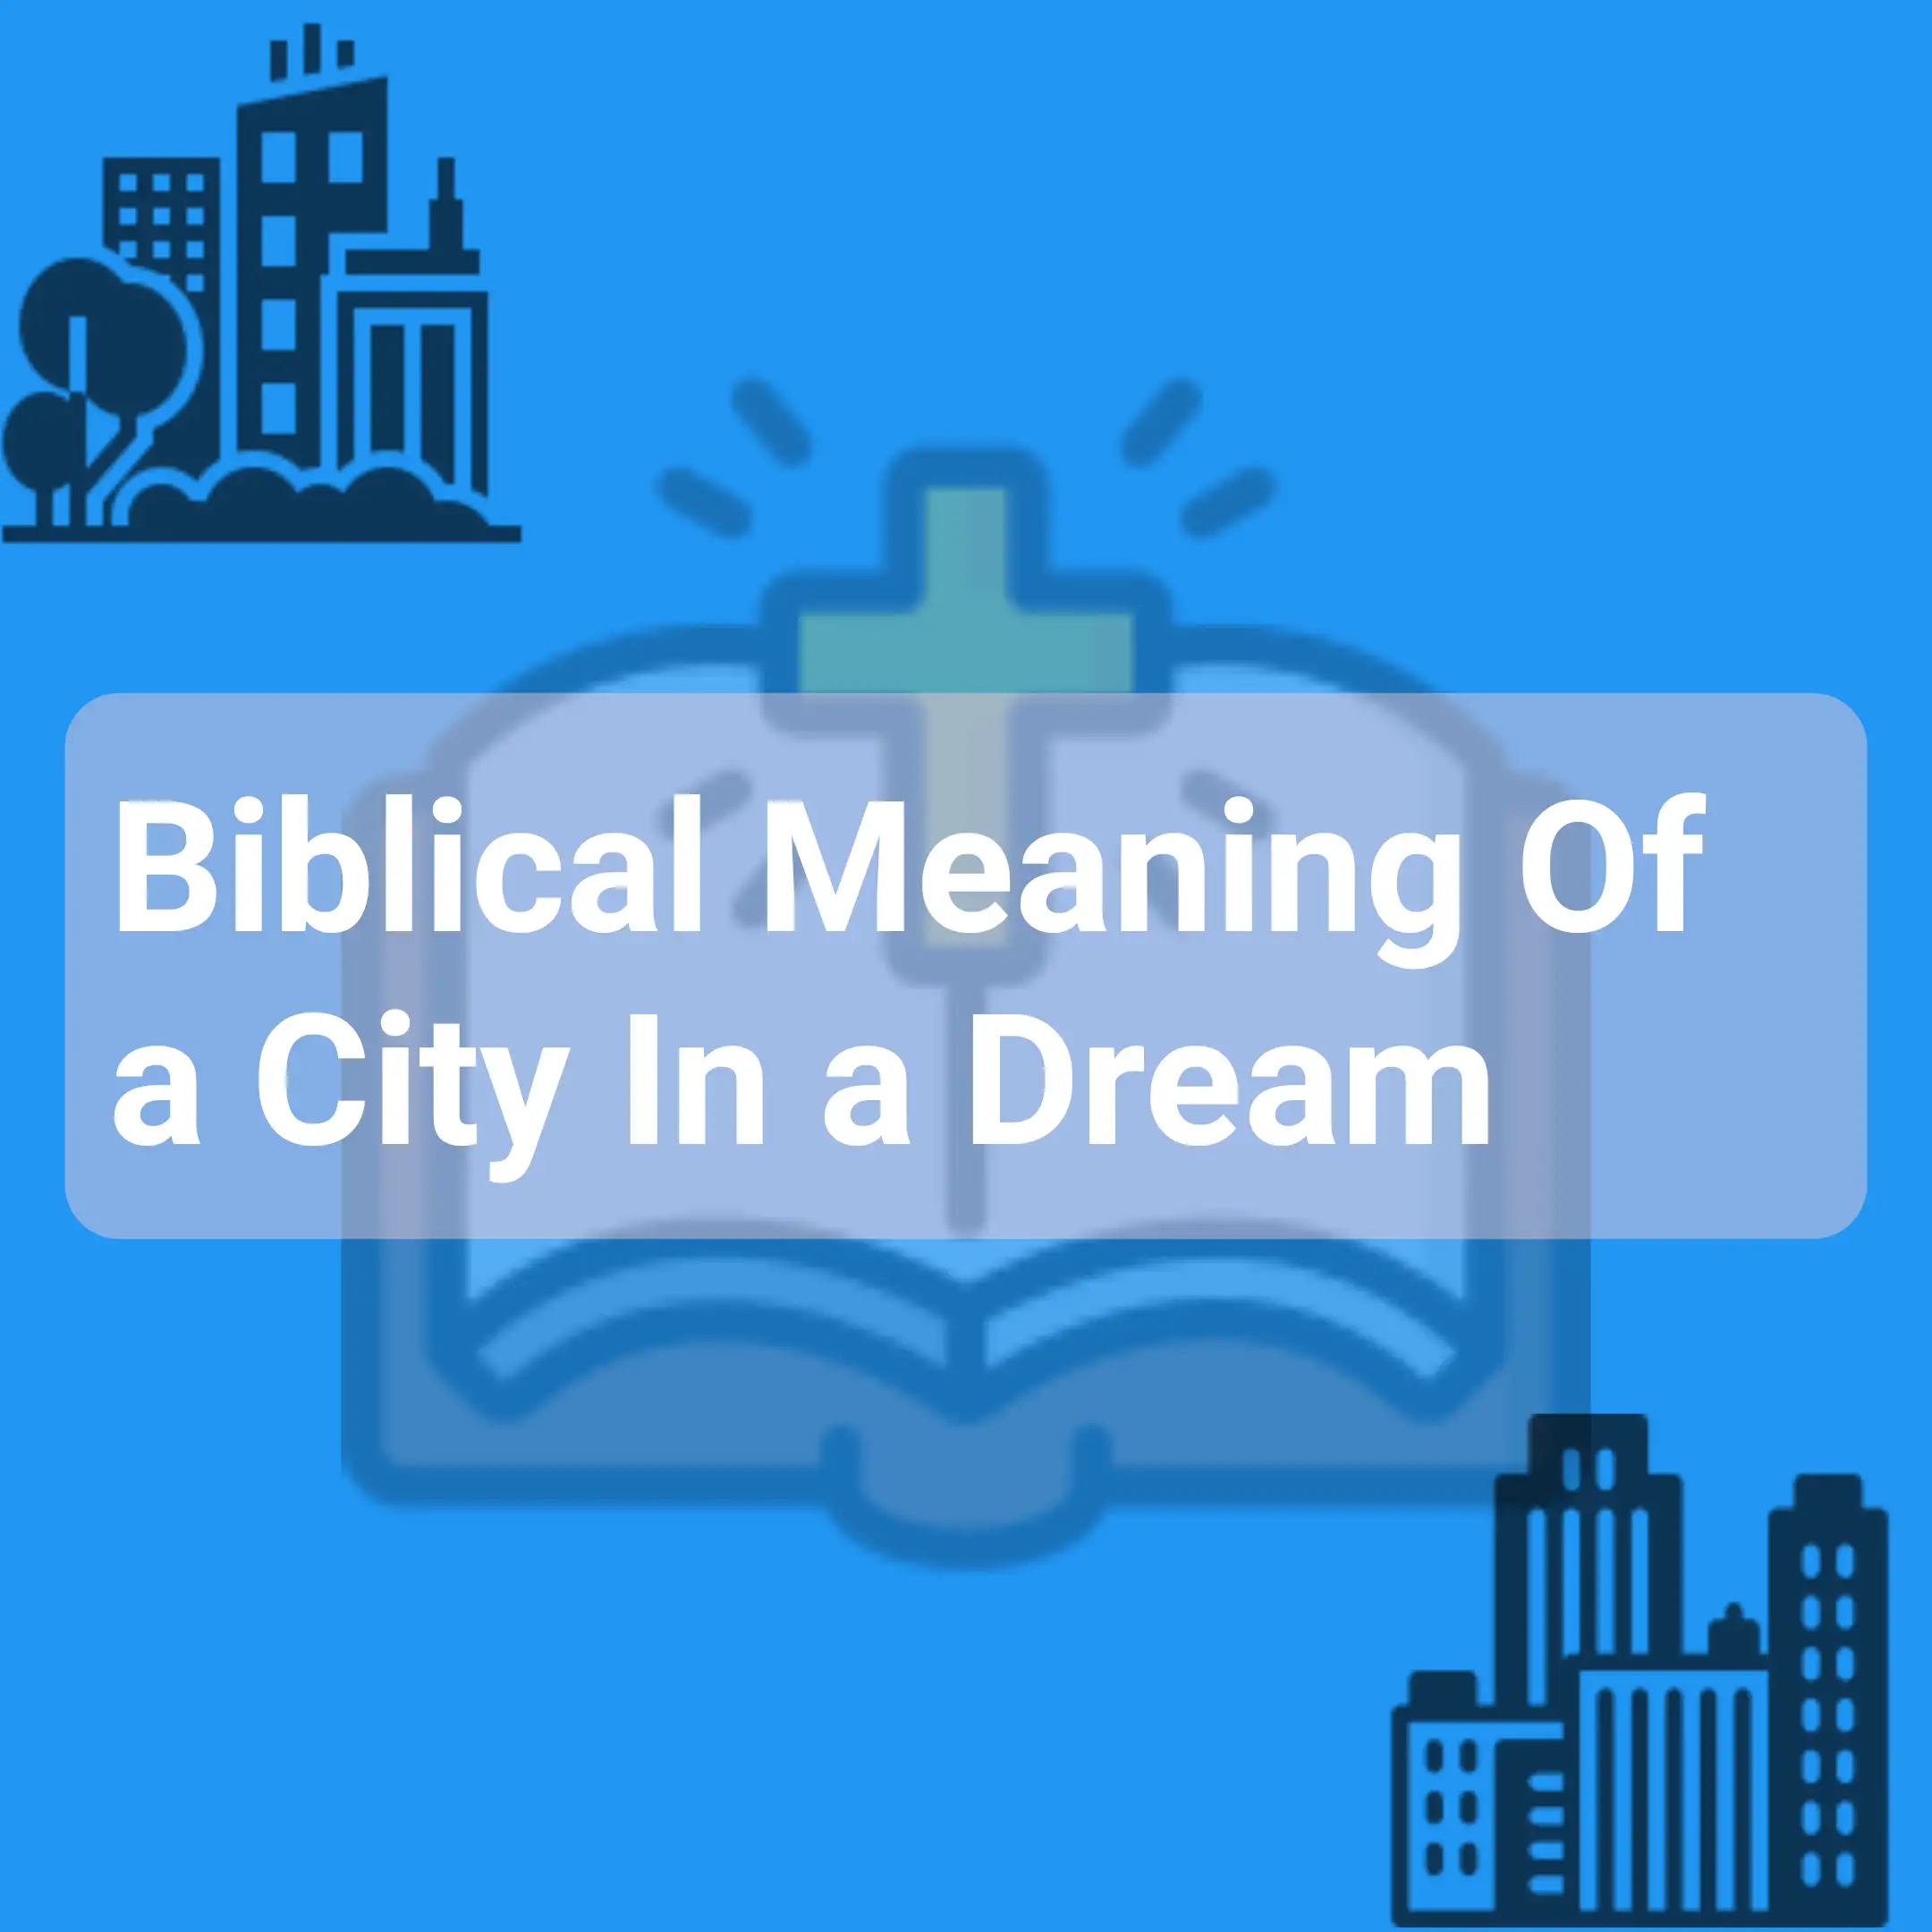 Biblical Meaning Of a City In a Dream